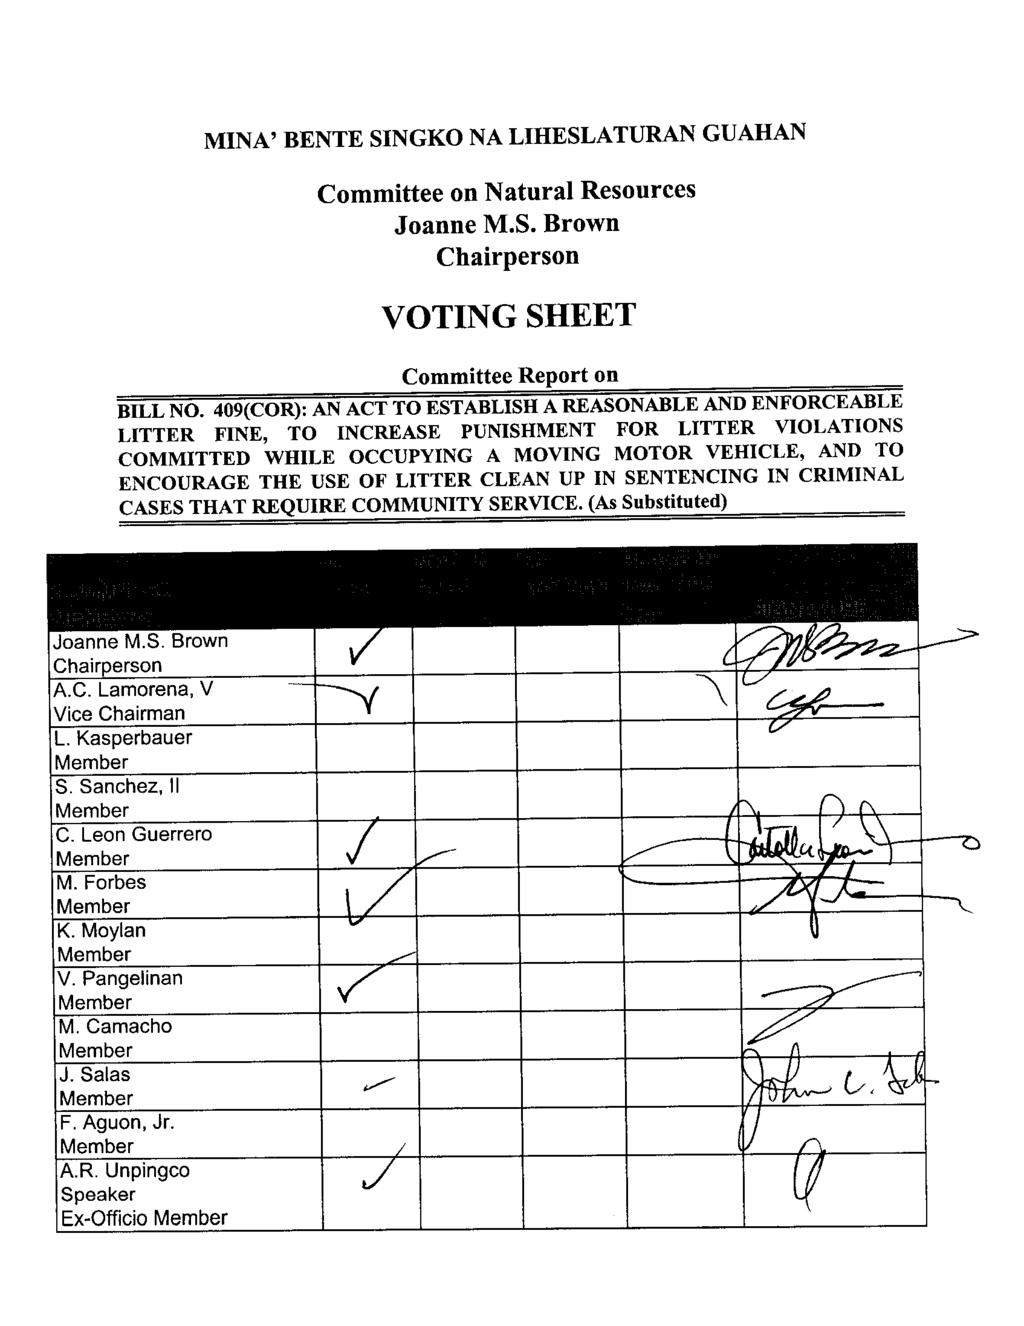 MINA' BENTE SINGKO NA LIHESLATURAN GUAHAN Committee on Natural Resources Joanne M.S. Brown Chairperson VOTING SHEET Committee Report on BILL NO.